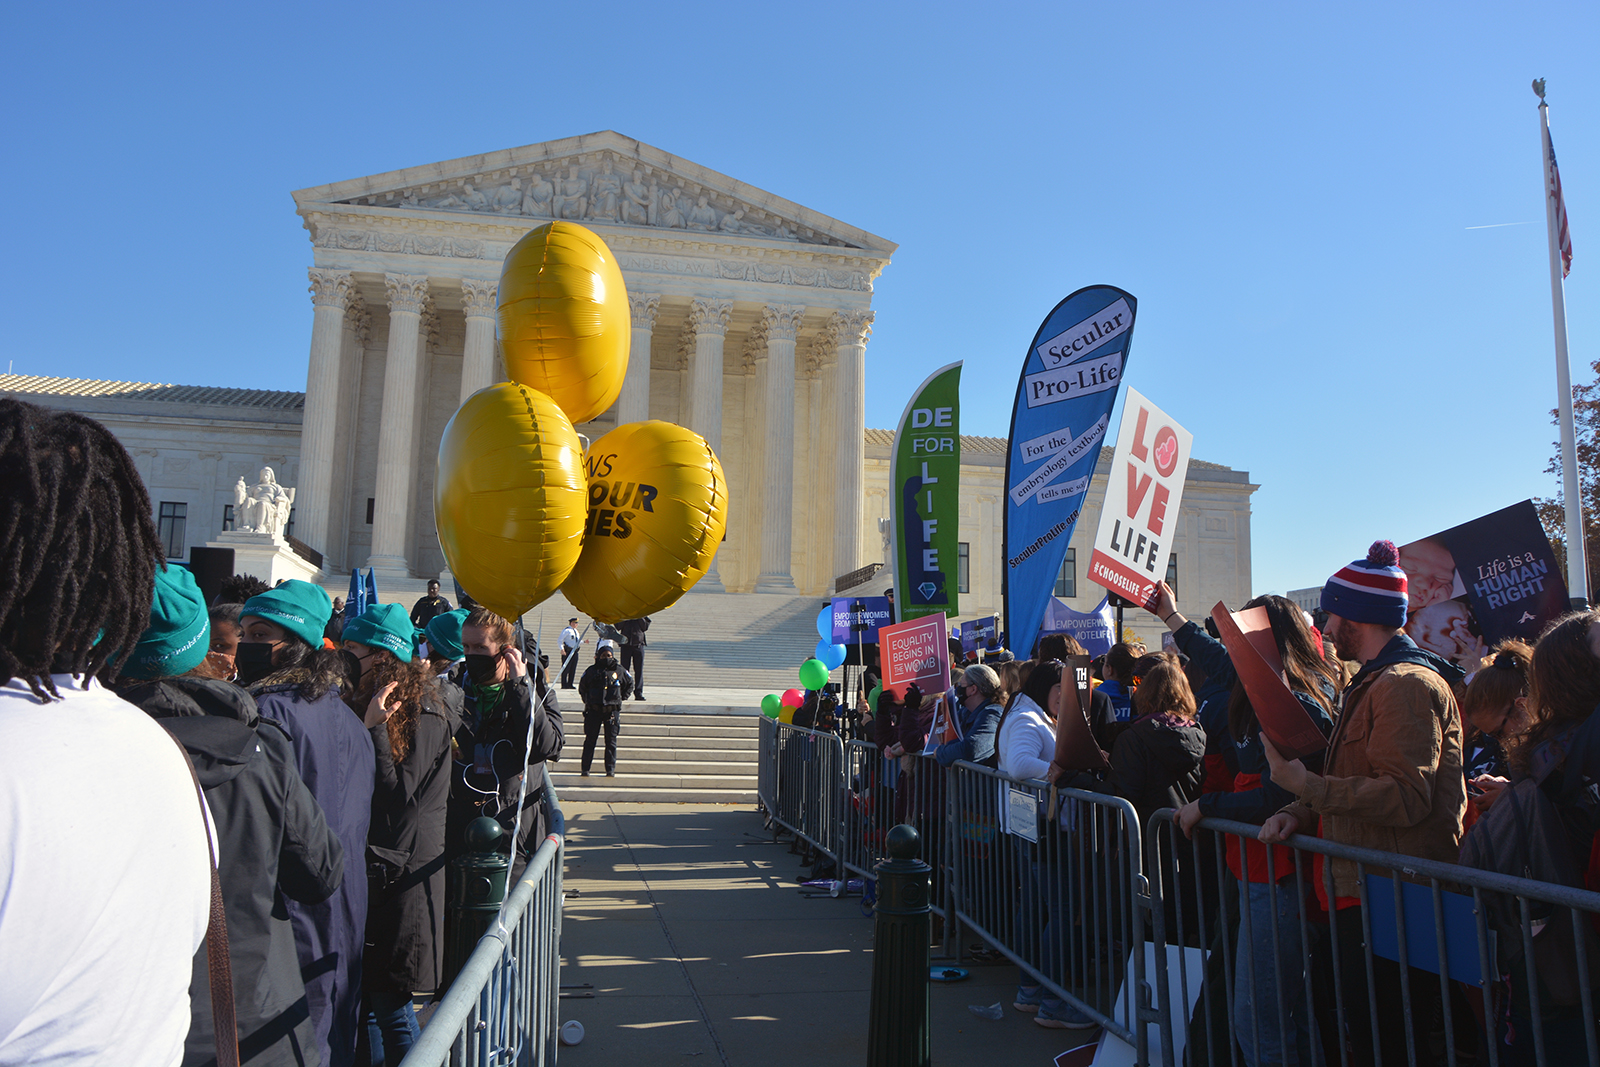 Abortion rights supporters and opponents protest outside the United States Supreme Court on Wednesday, December 1, 2021, in Washington, DC RNS photo by Jack Jenkins